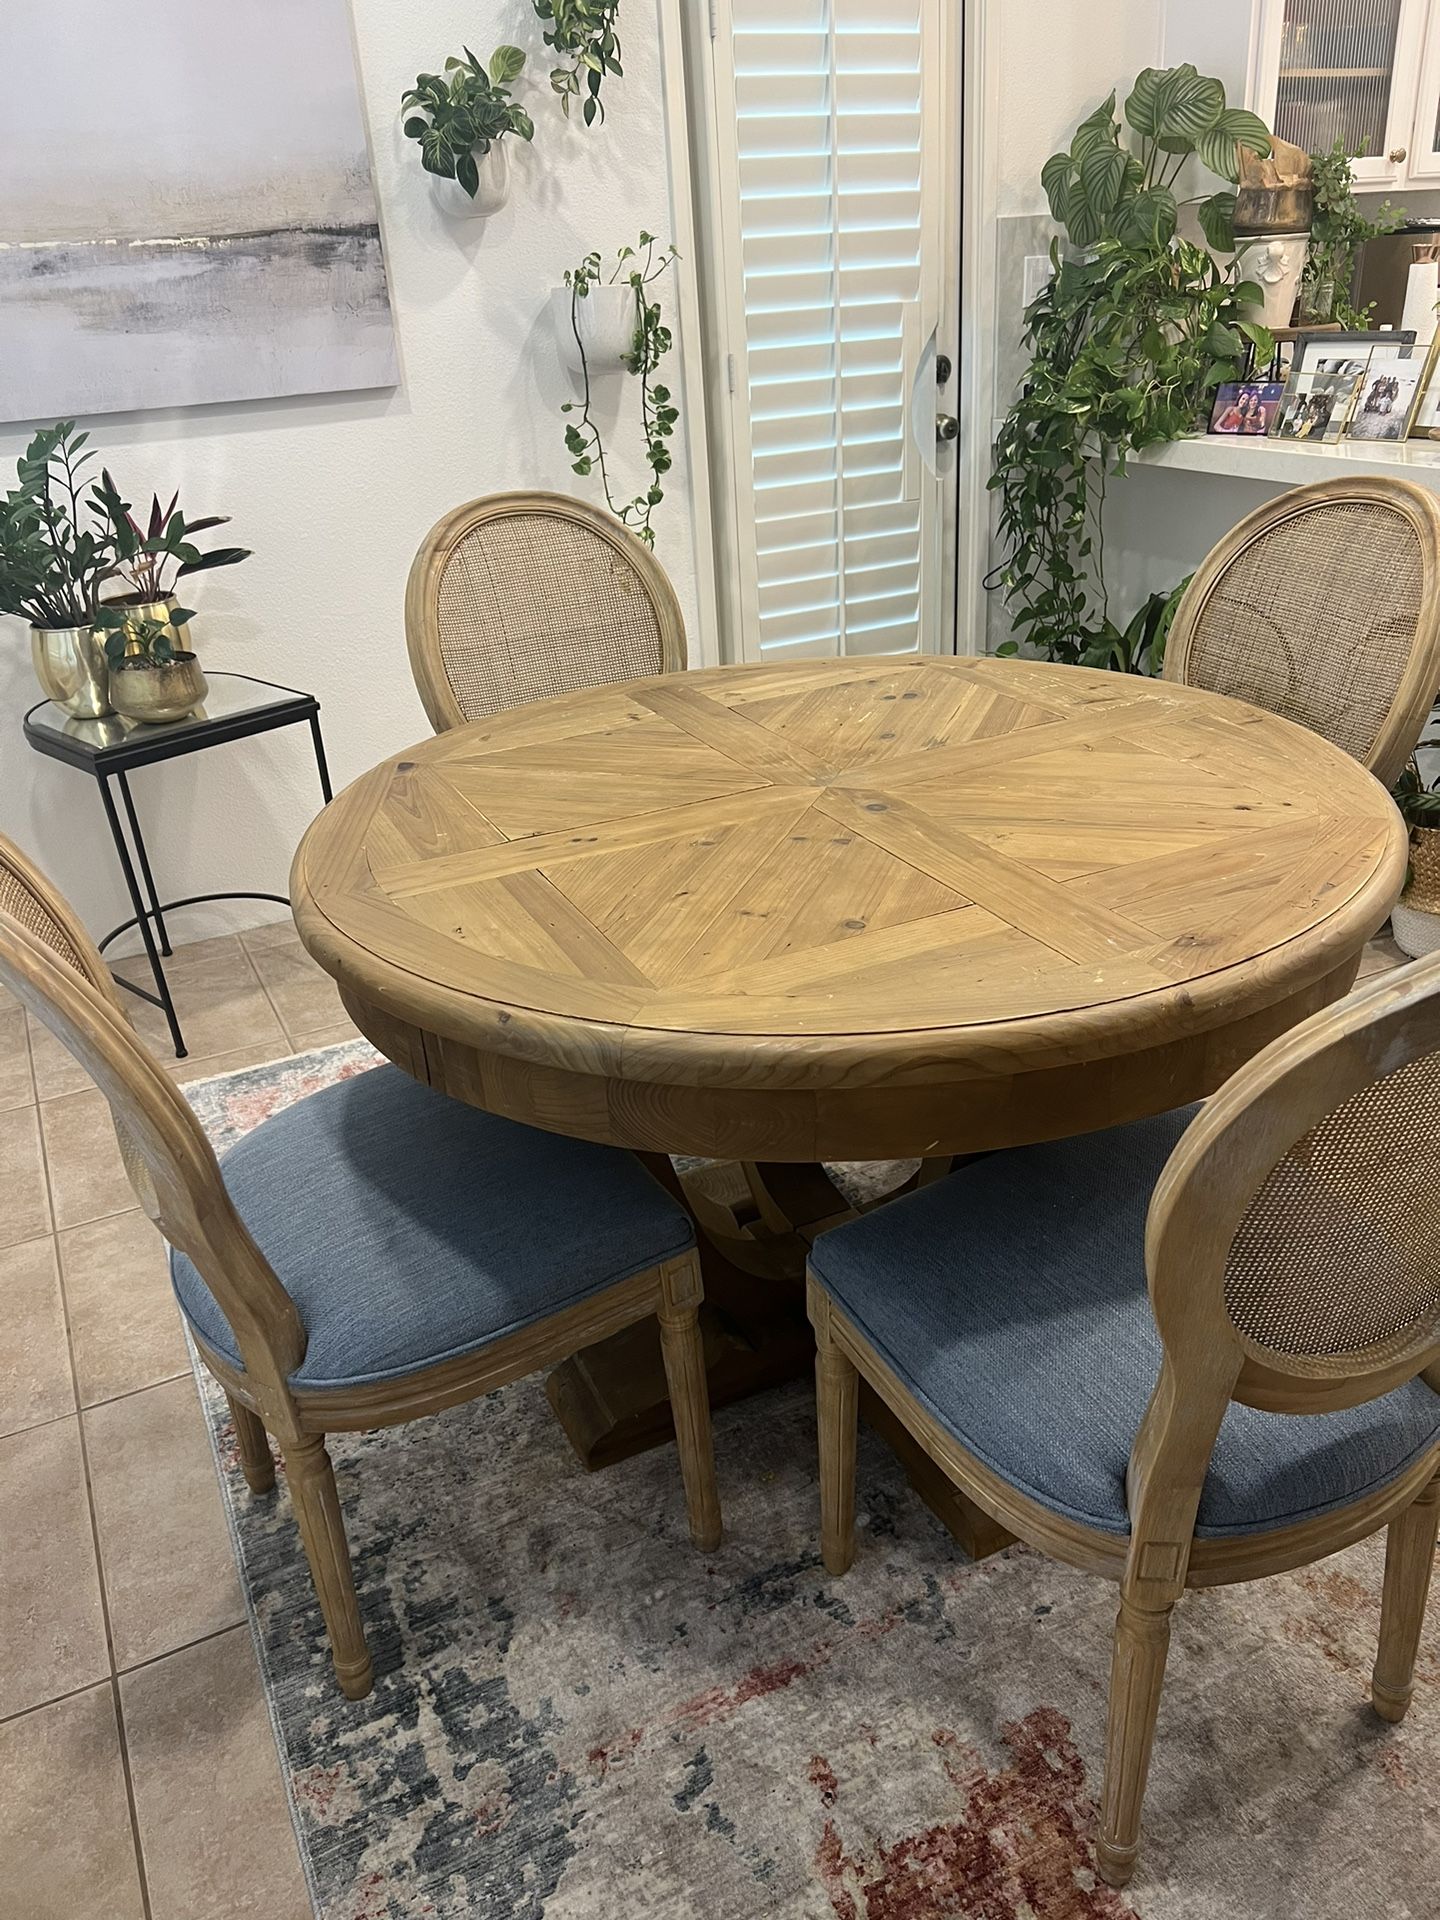 Table And chair Set 